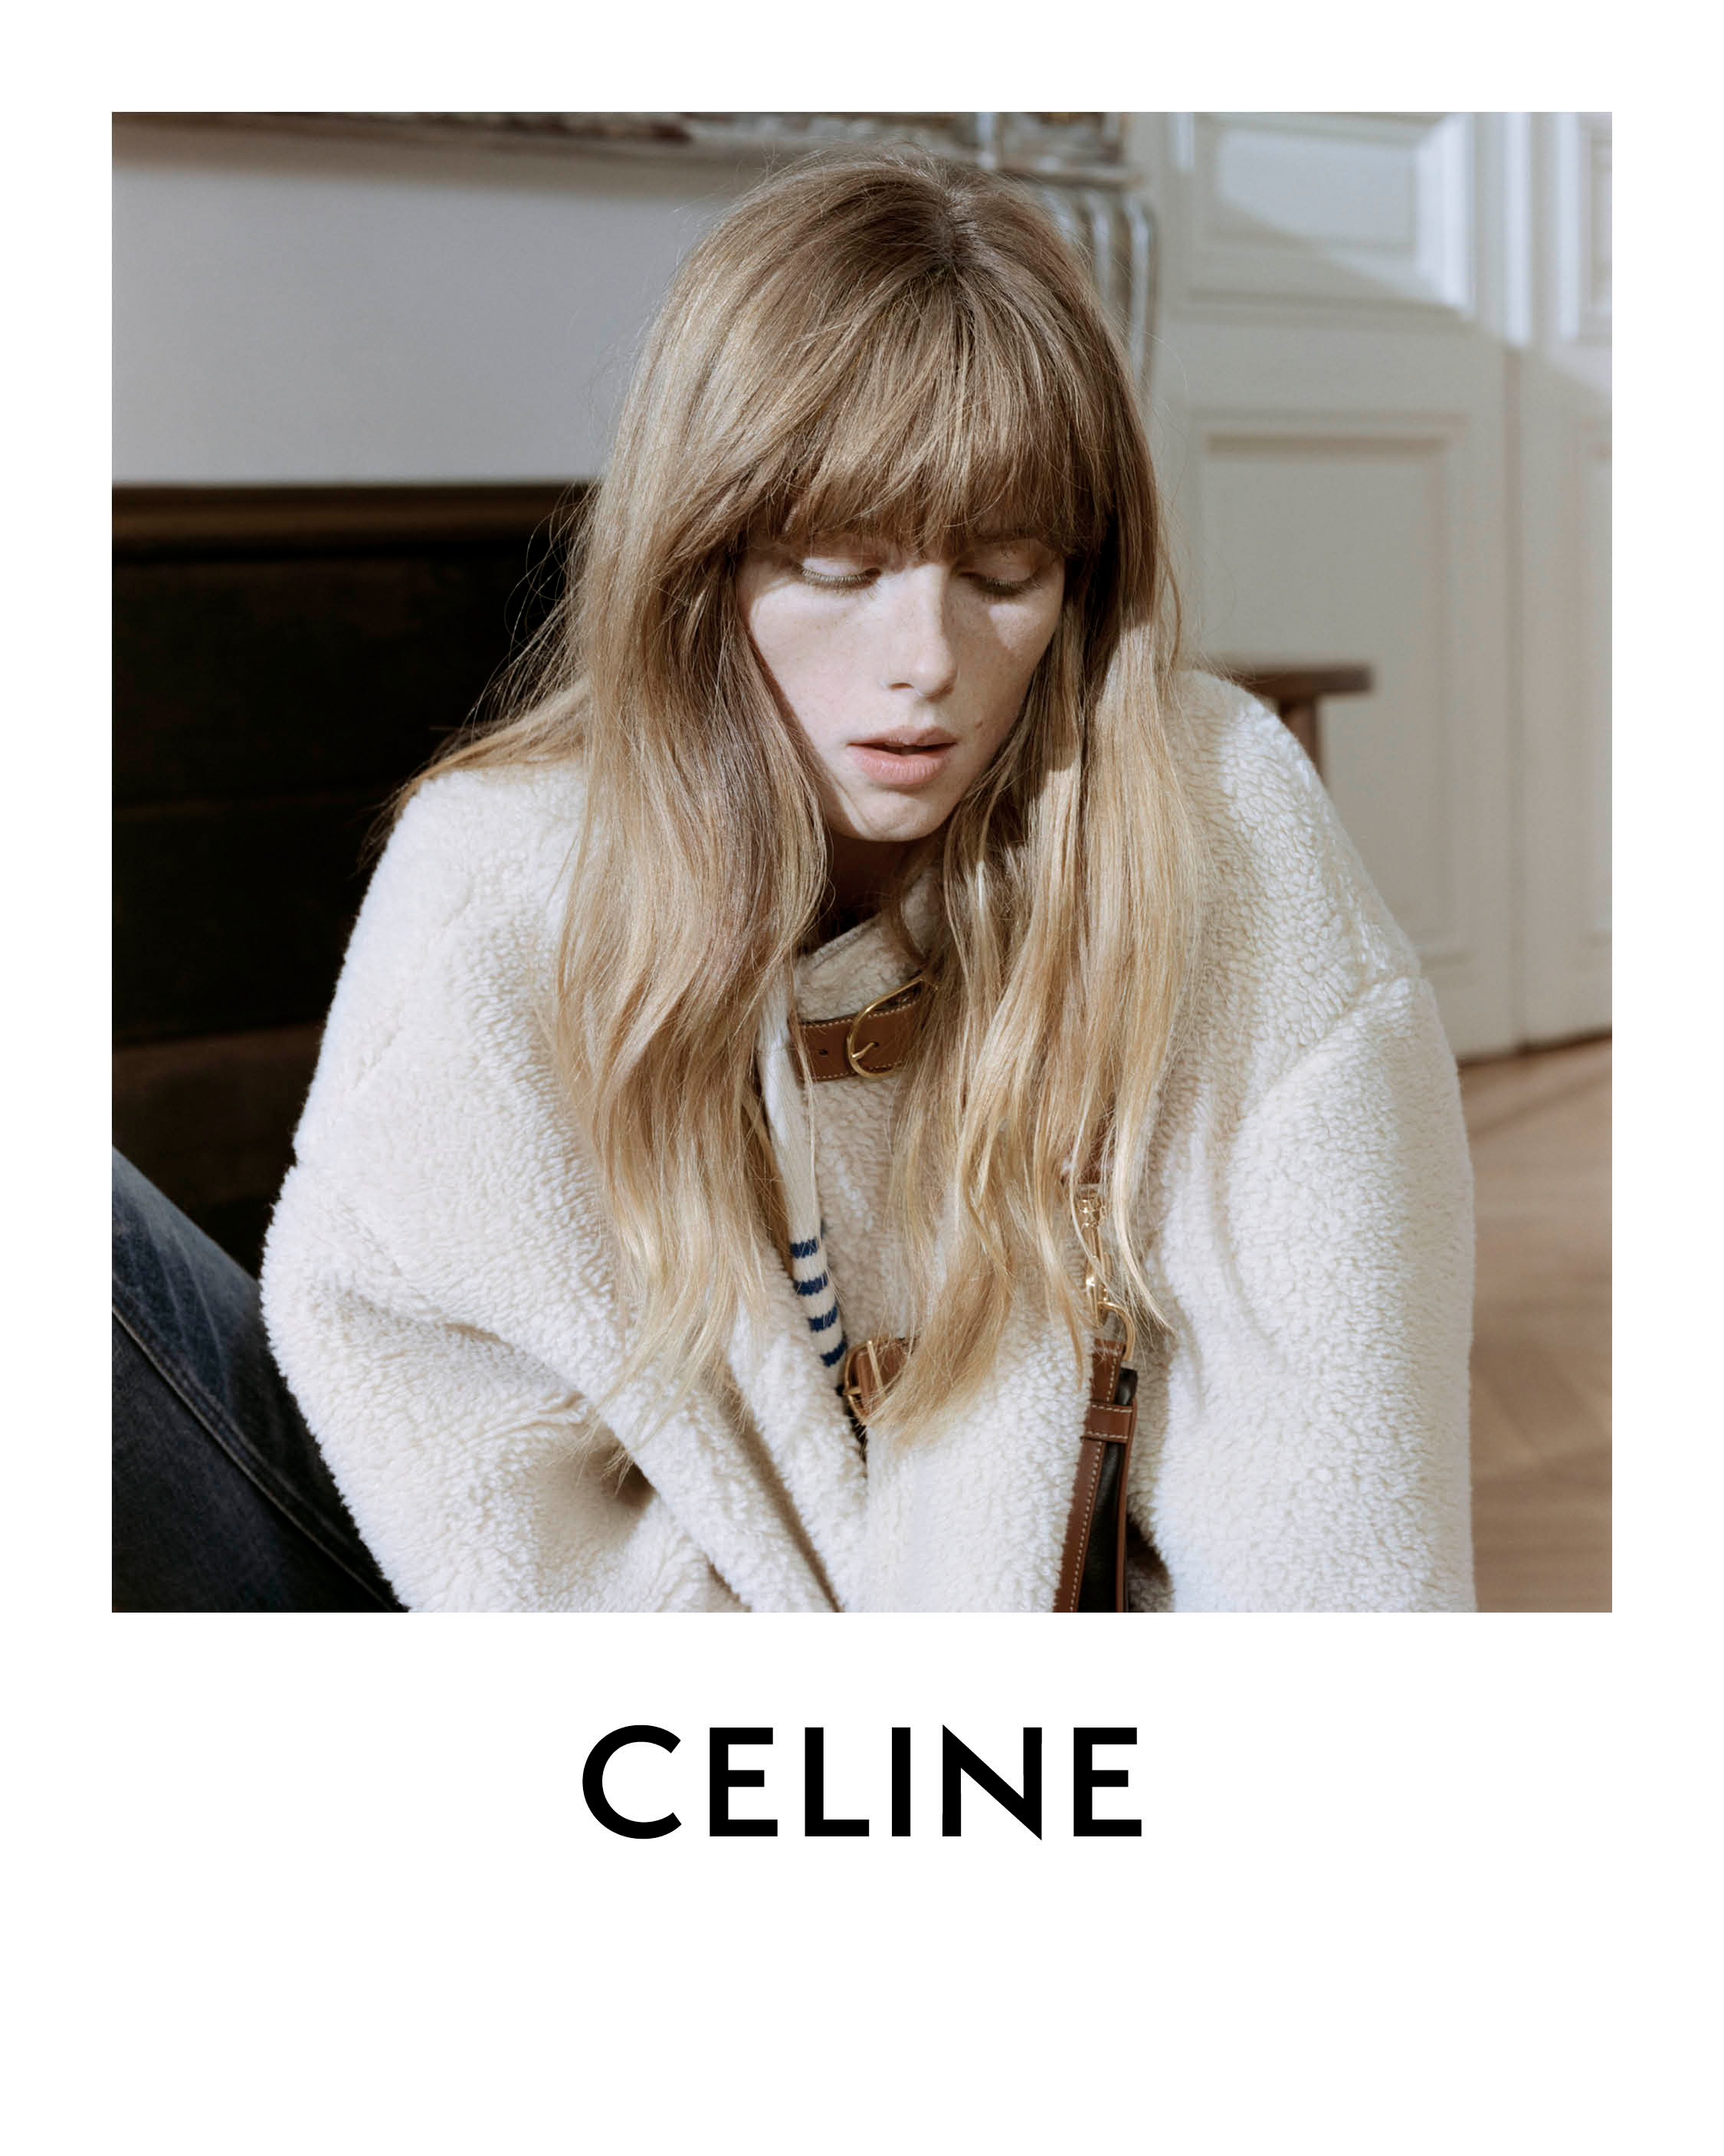 Celine and Chanel Inspired Cardigan Jackets - ANNIE B.